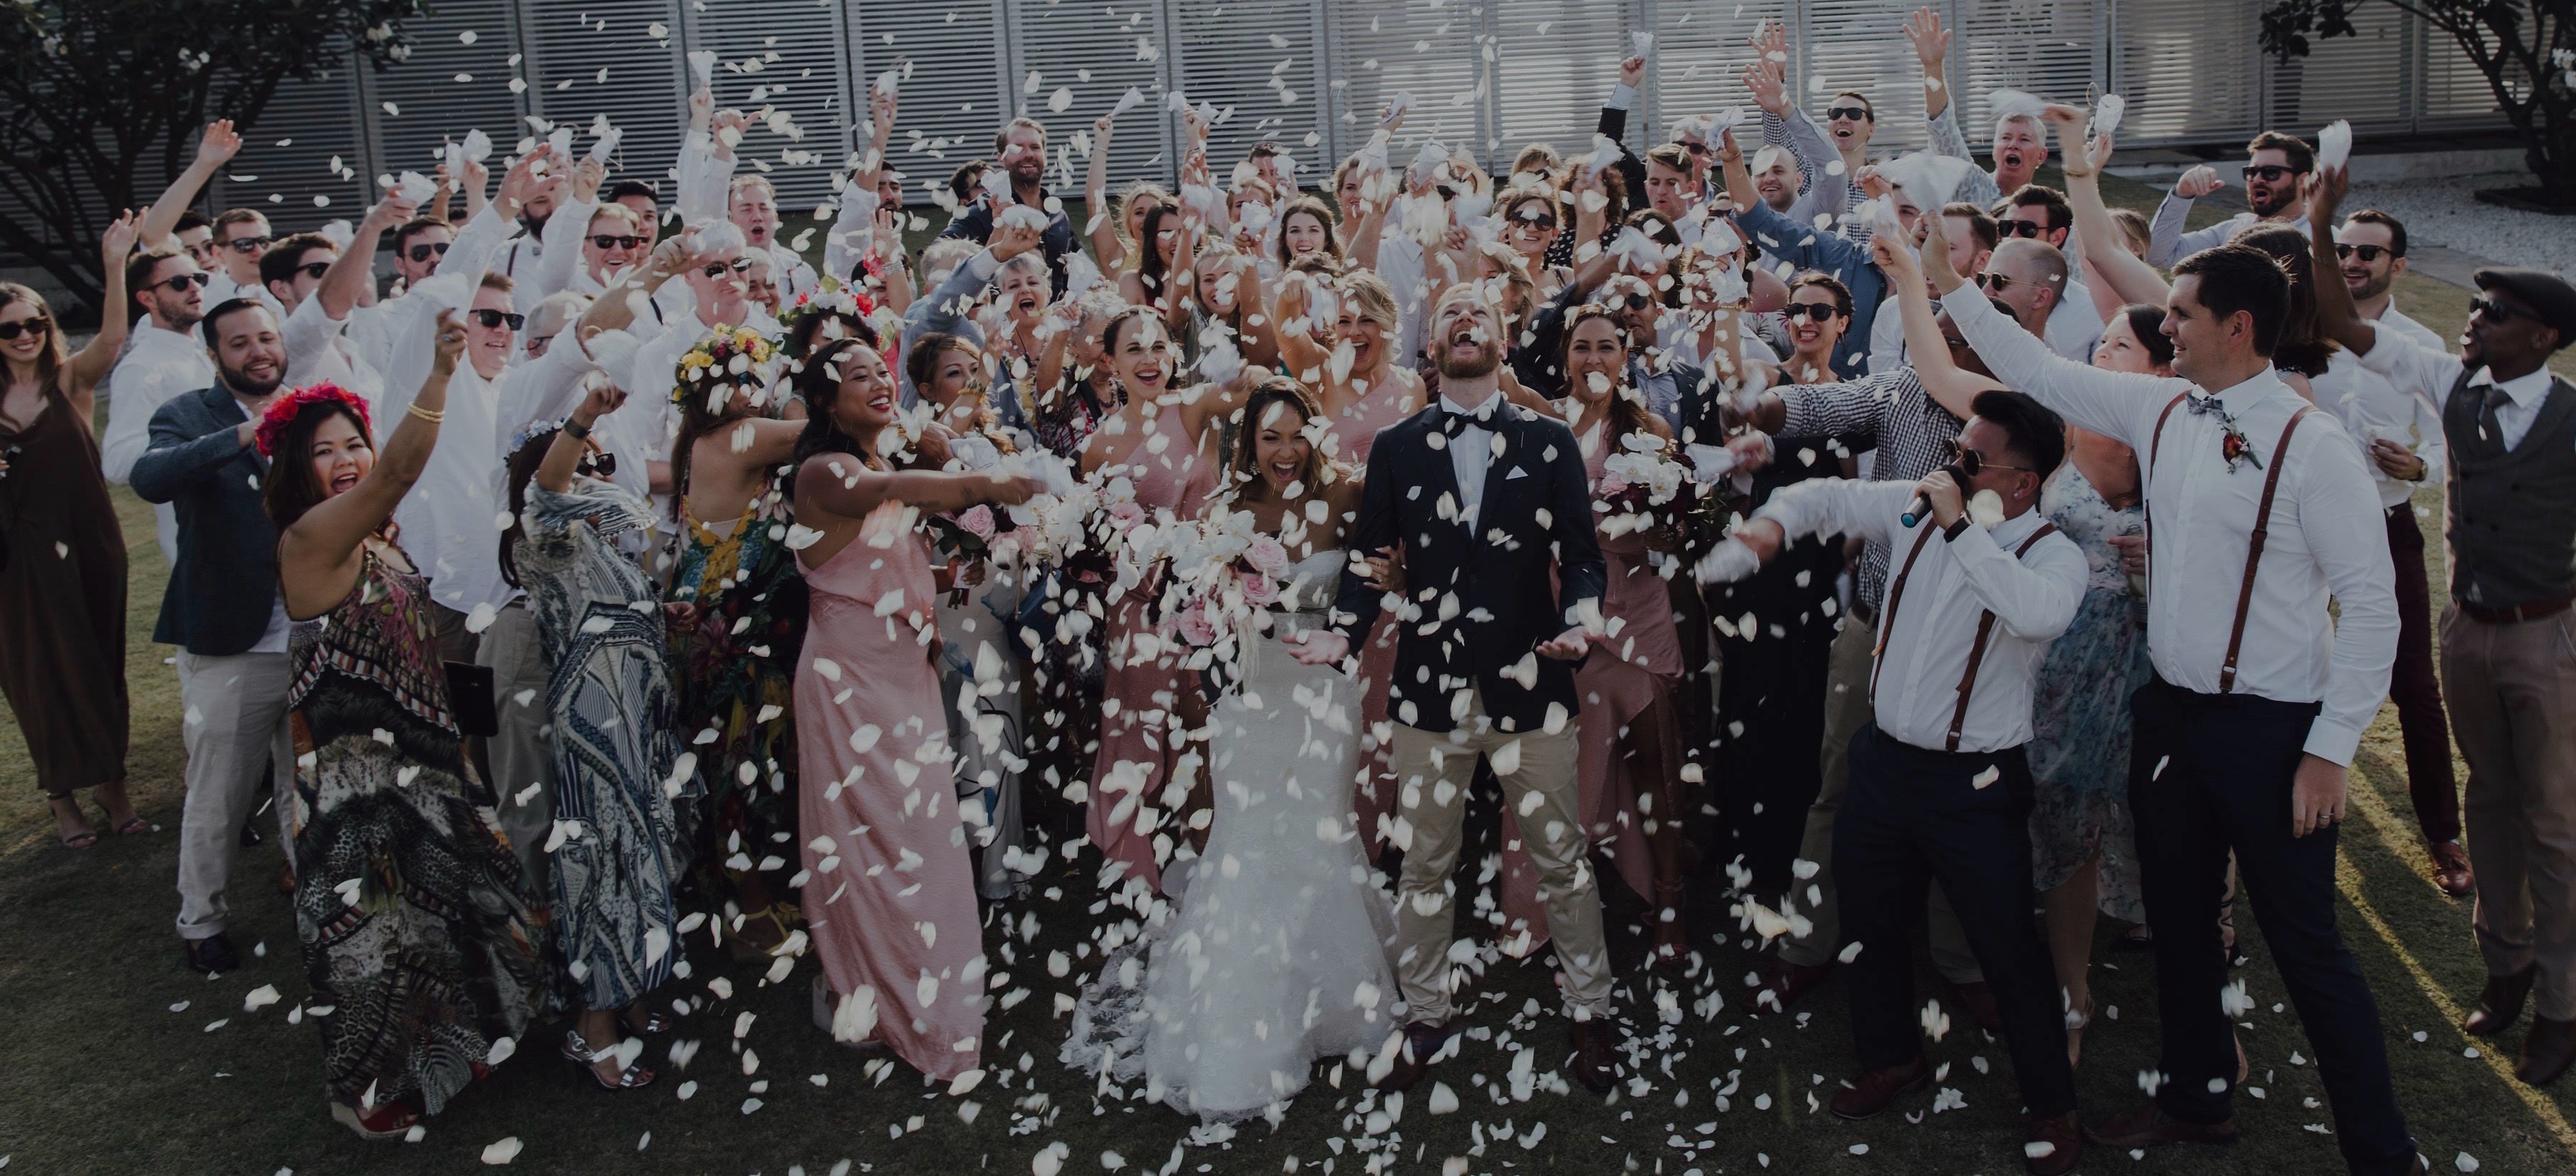 “The best wedding I have ever been to, so glad it was mine!”